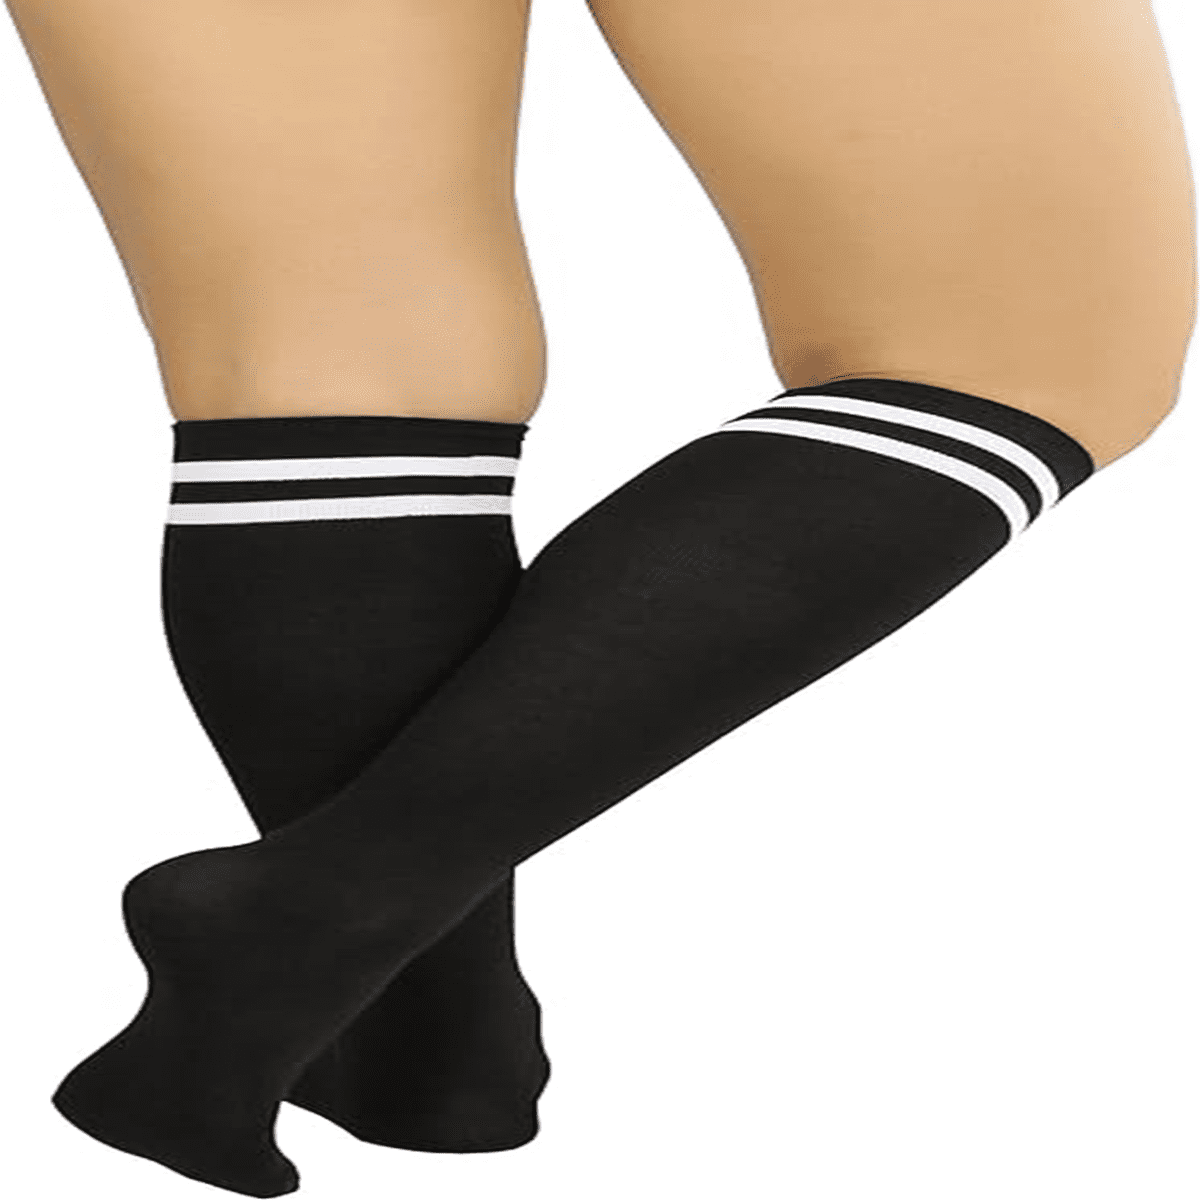 Old School Black And Double White Striped Knee High Socks